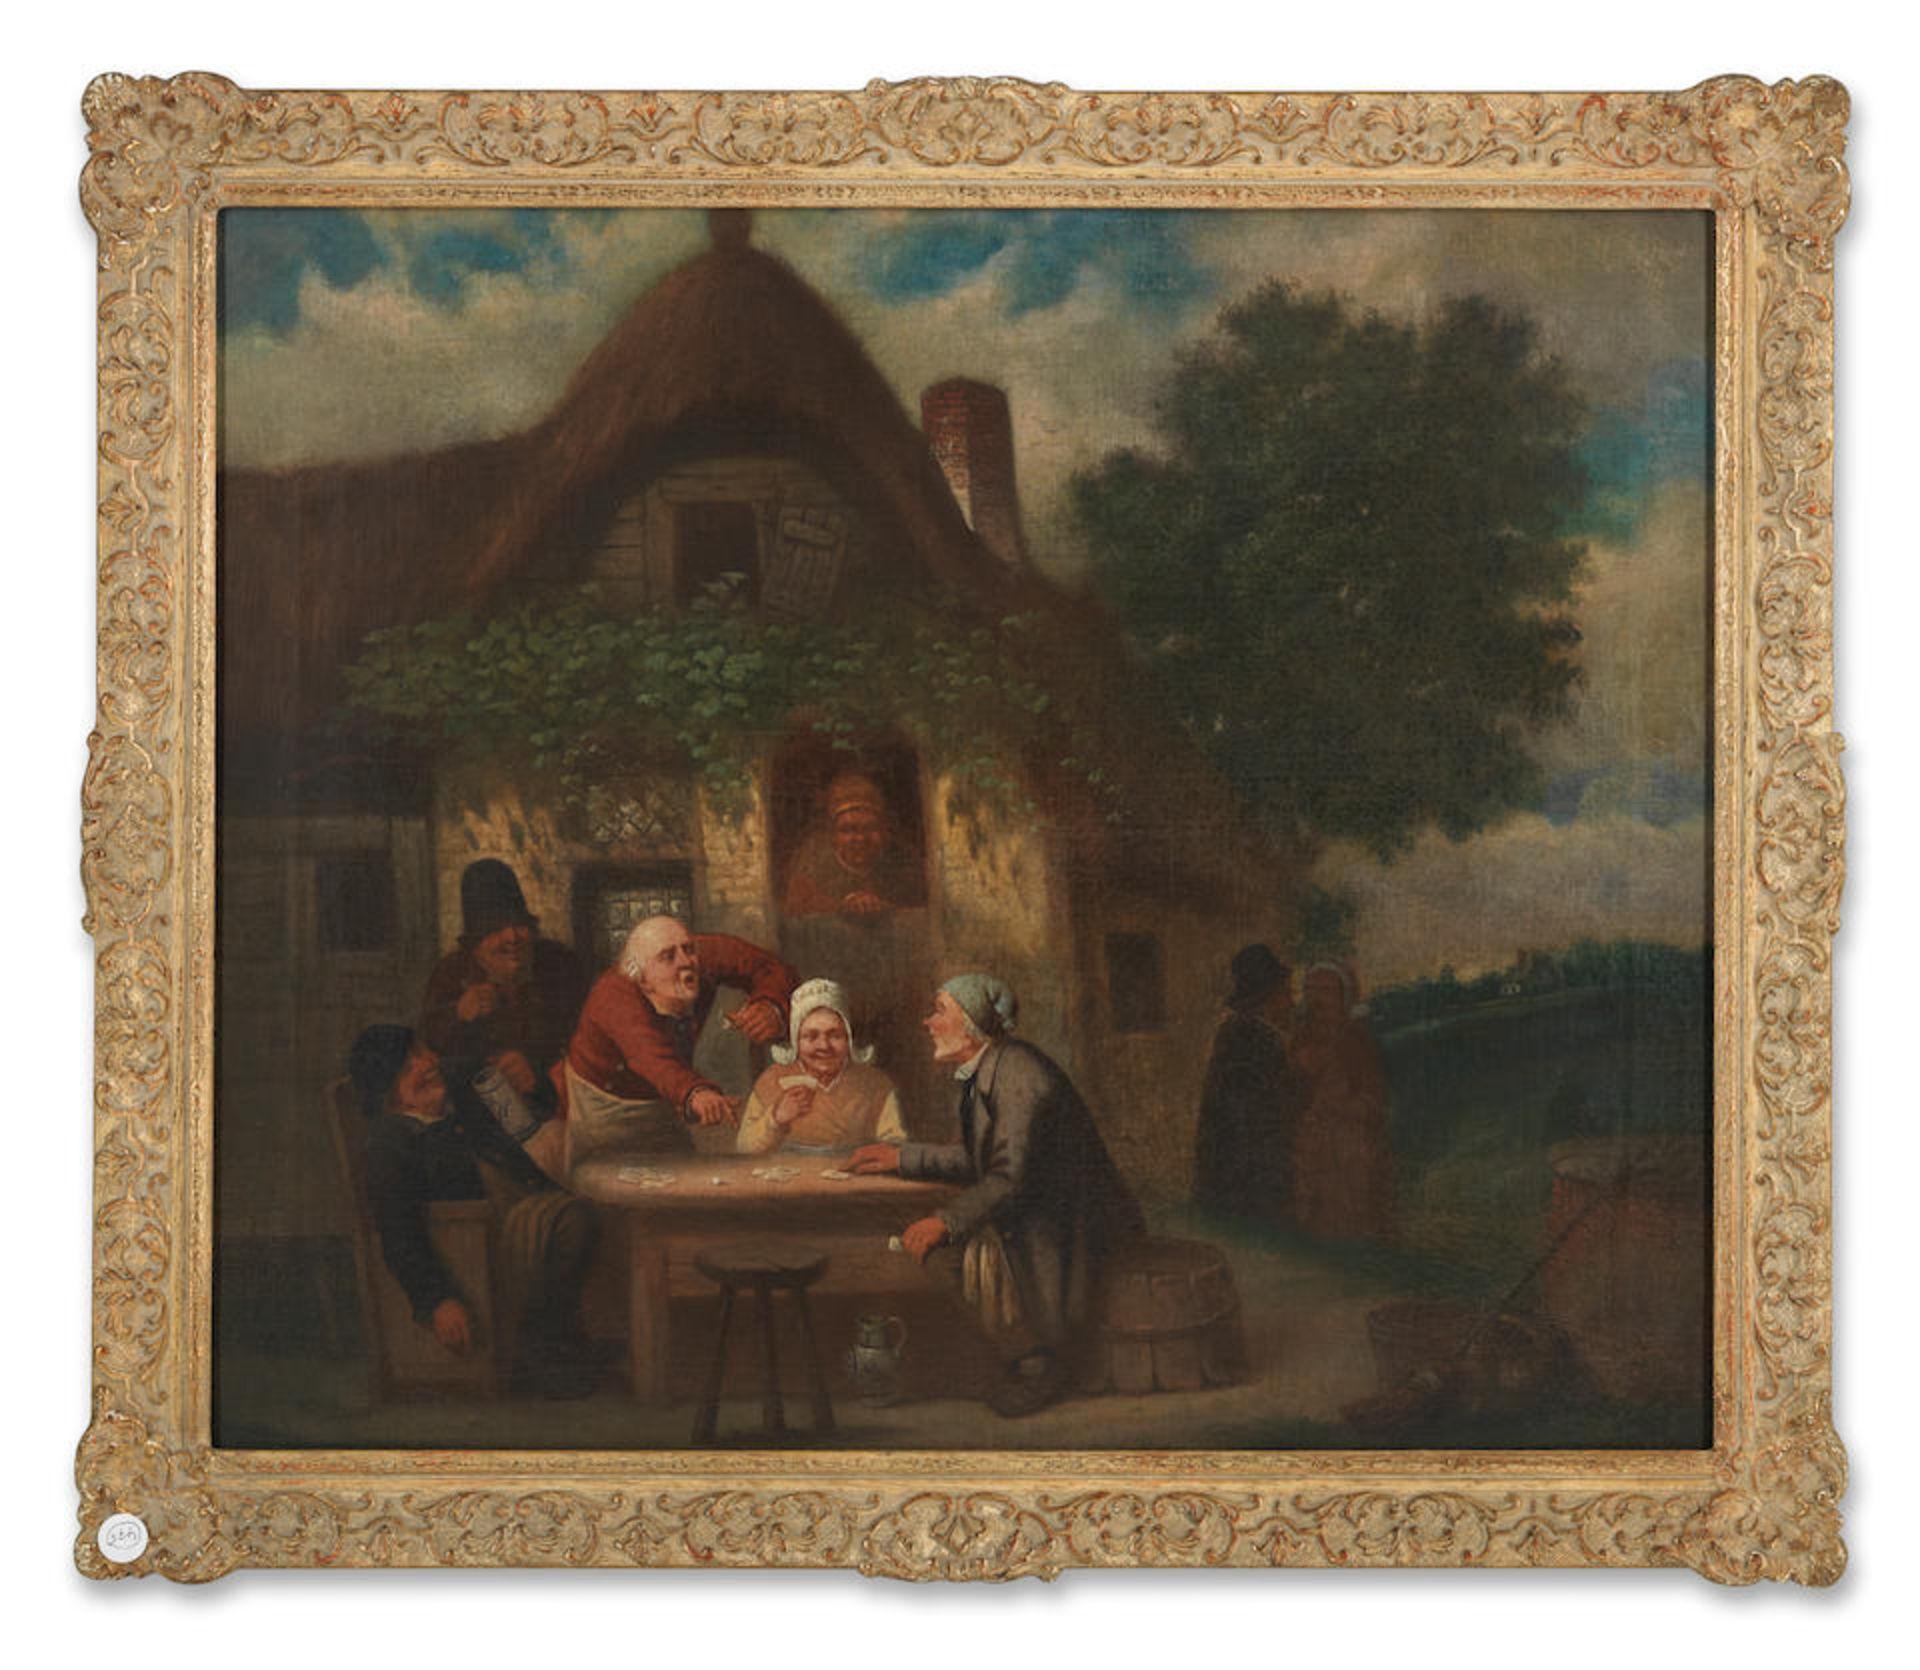 Dutch School, Early 19th Century Figures playing cards before a country inn - Image 2 of 3